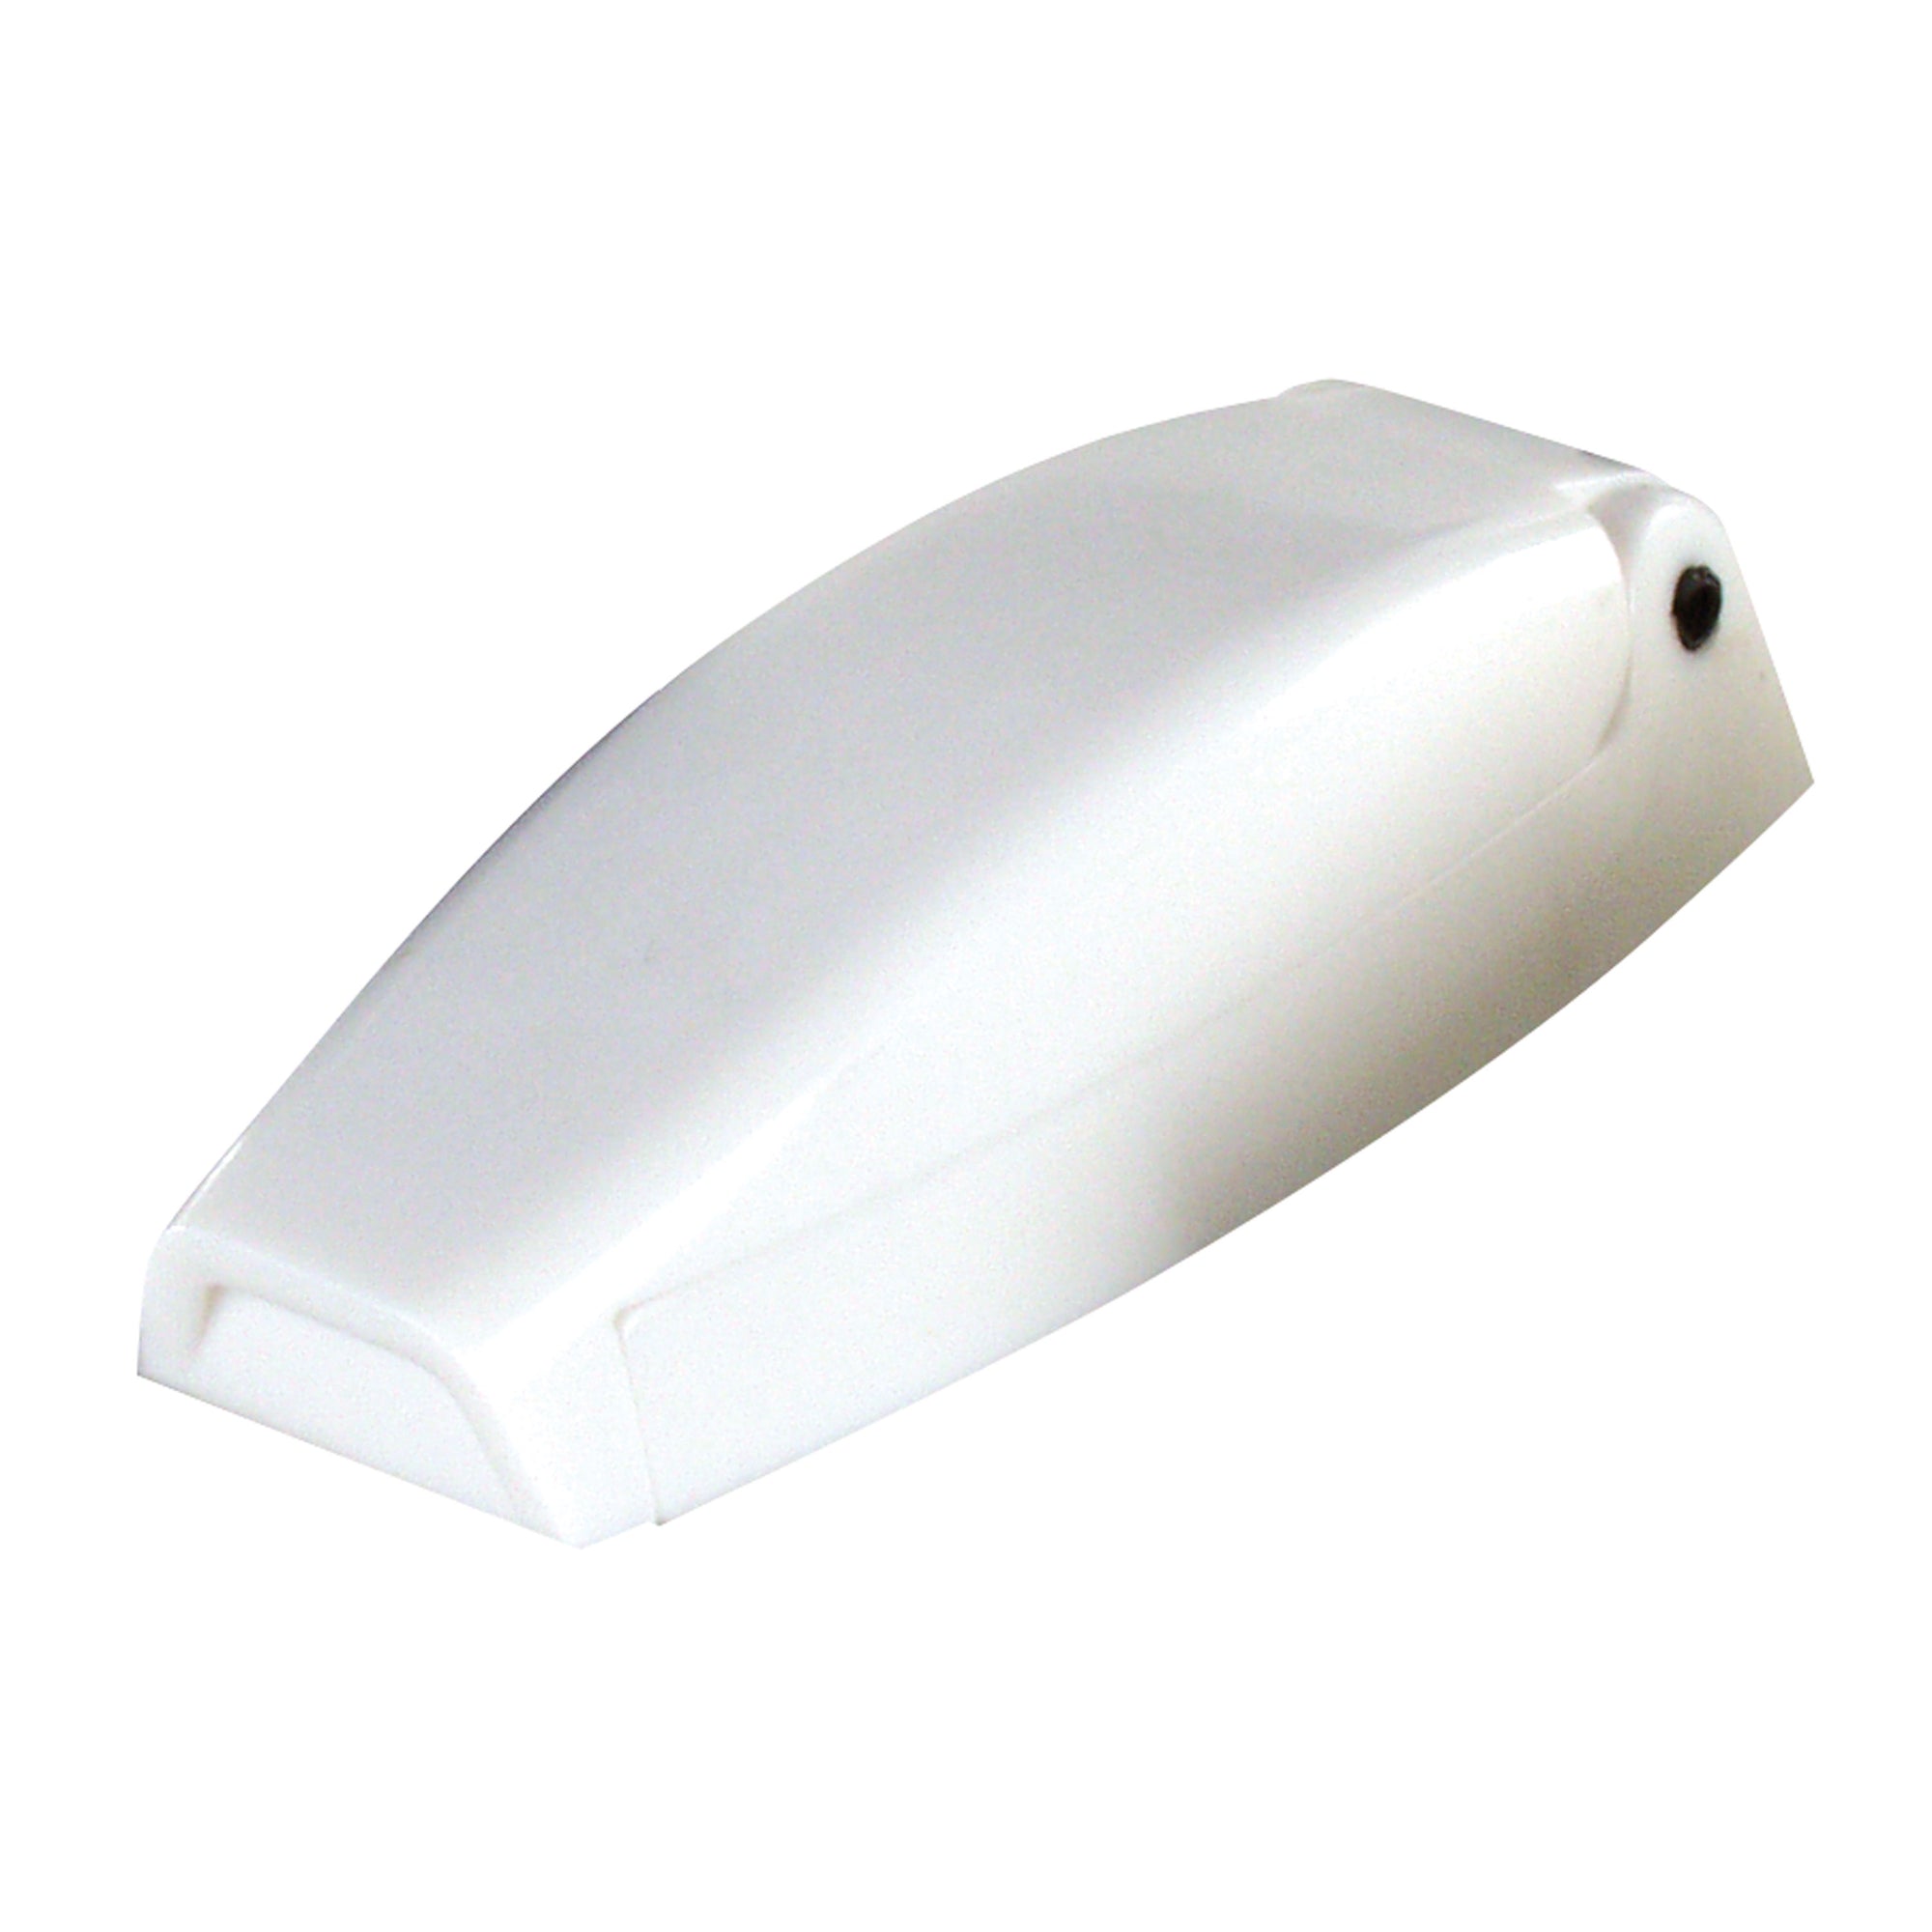 JR Products 10234 Baggage Door Catch - White, Pack of 2